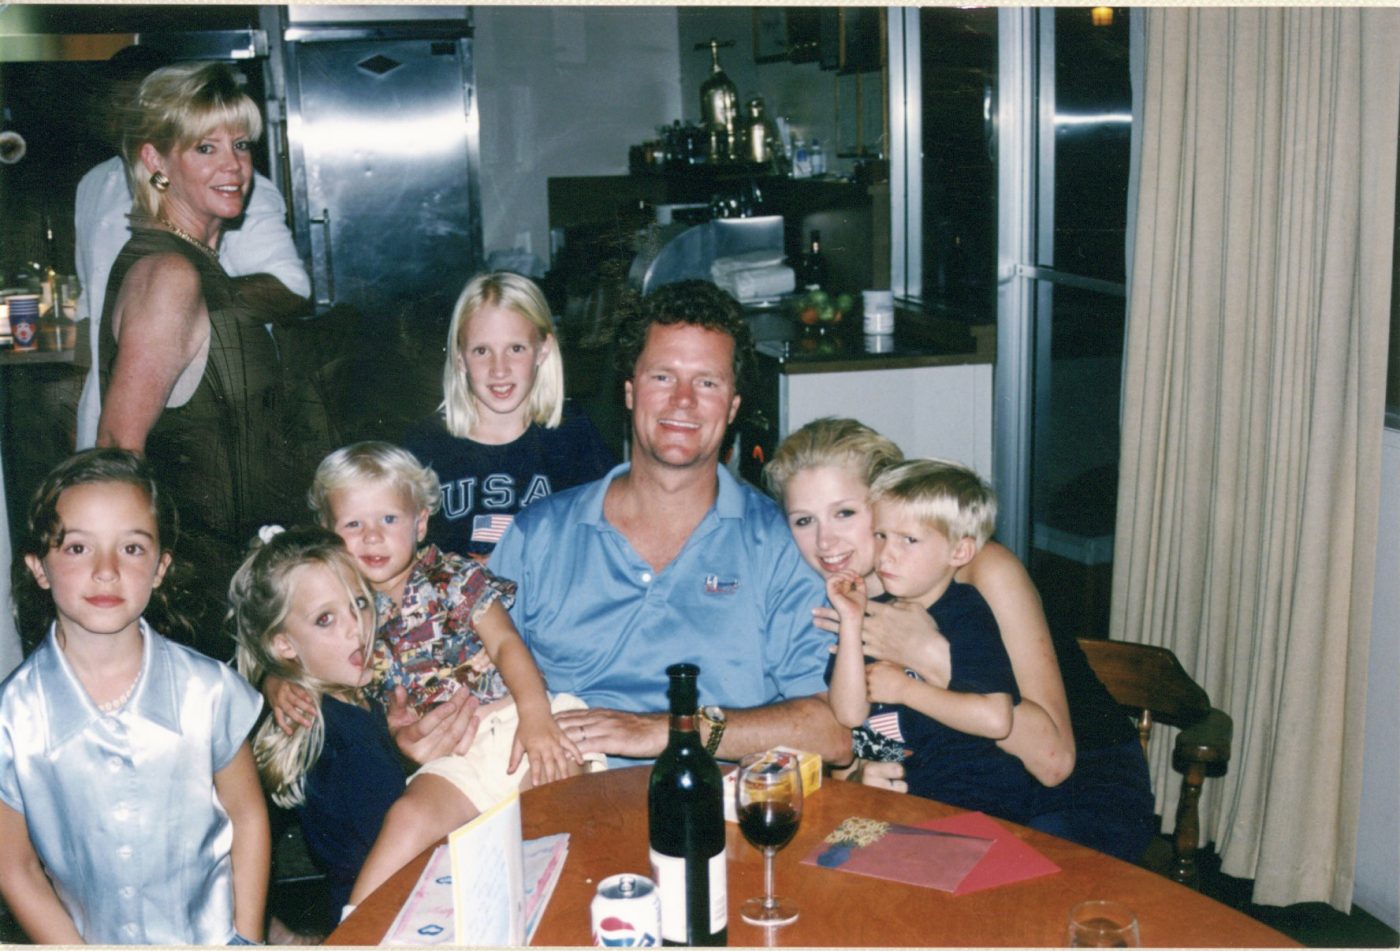 Paris with her dad, siblings and cousins